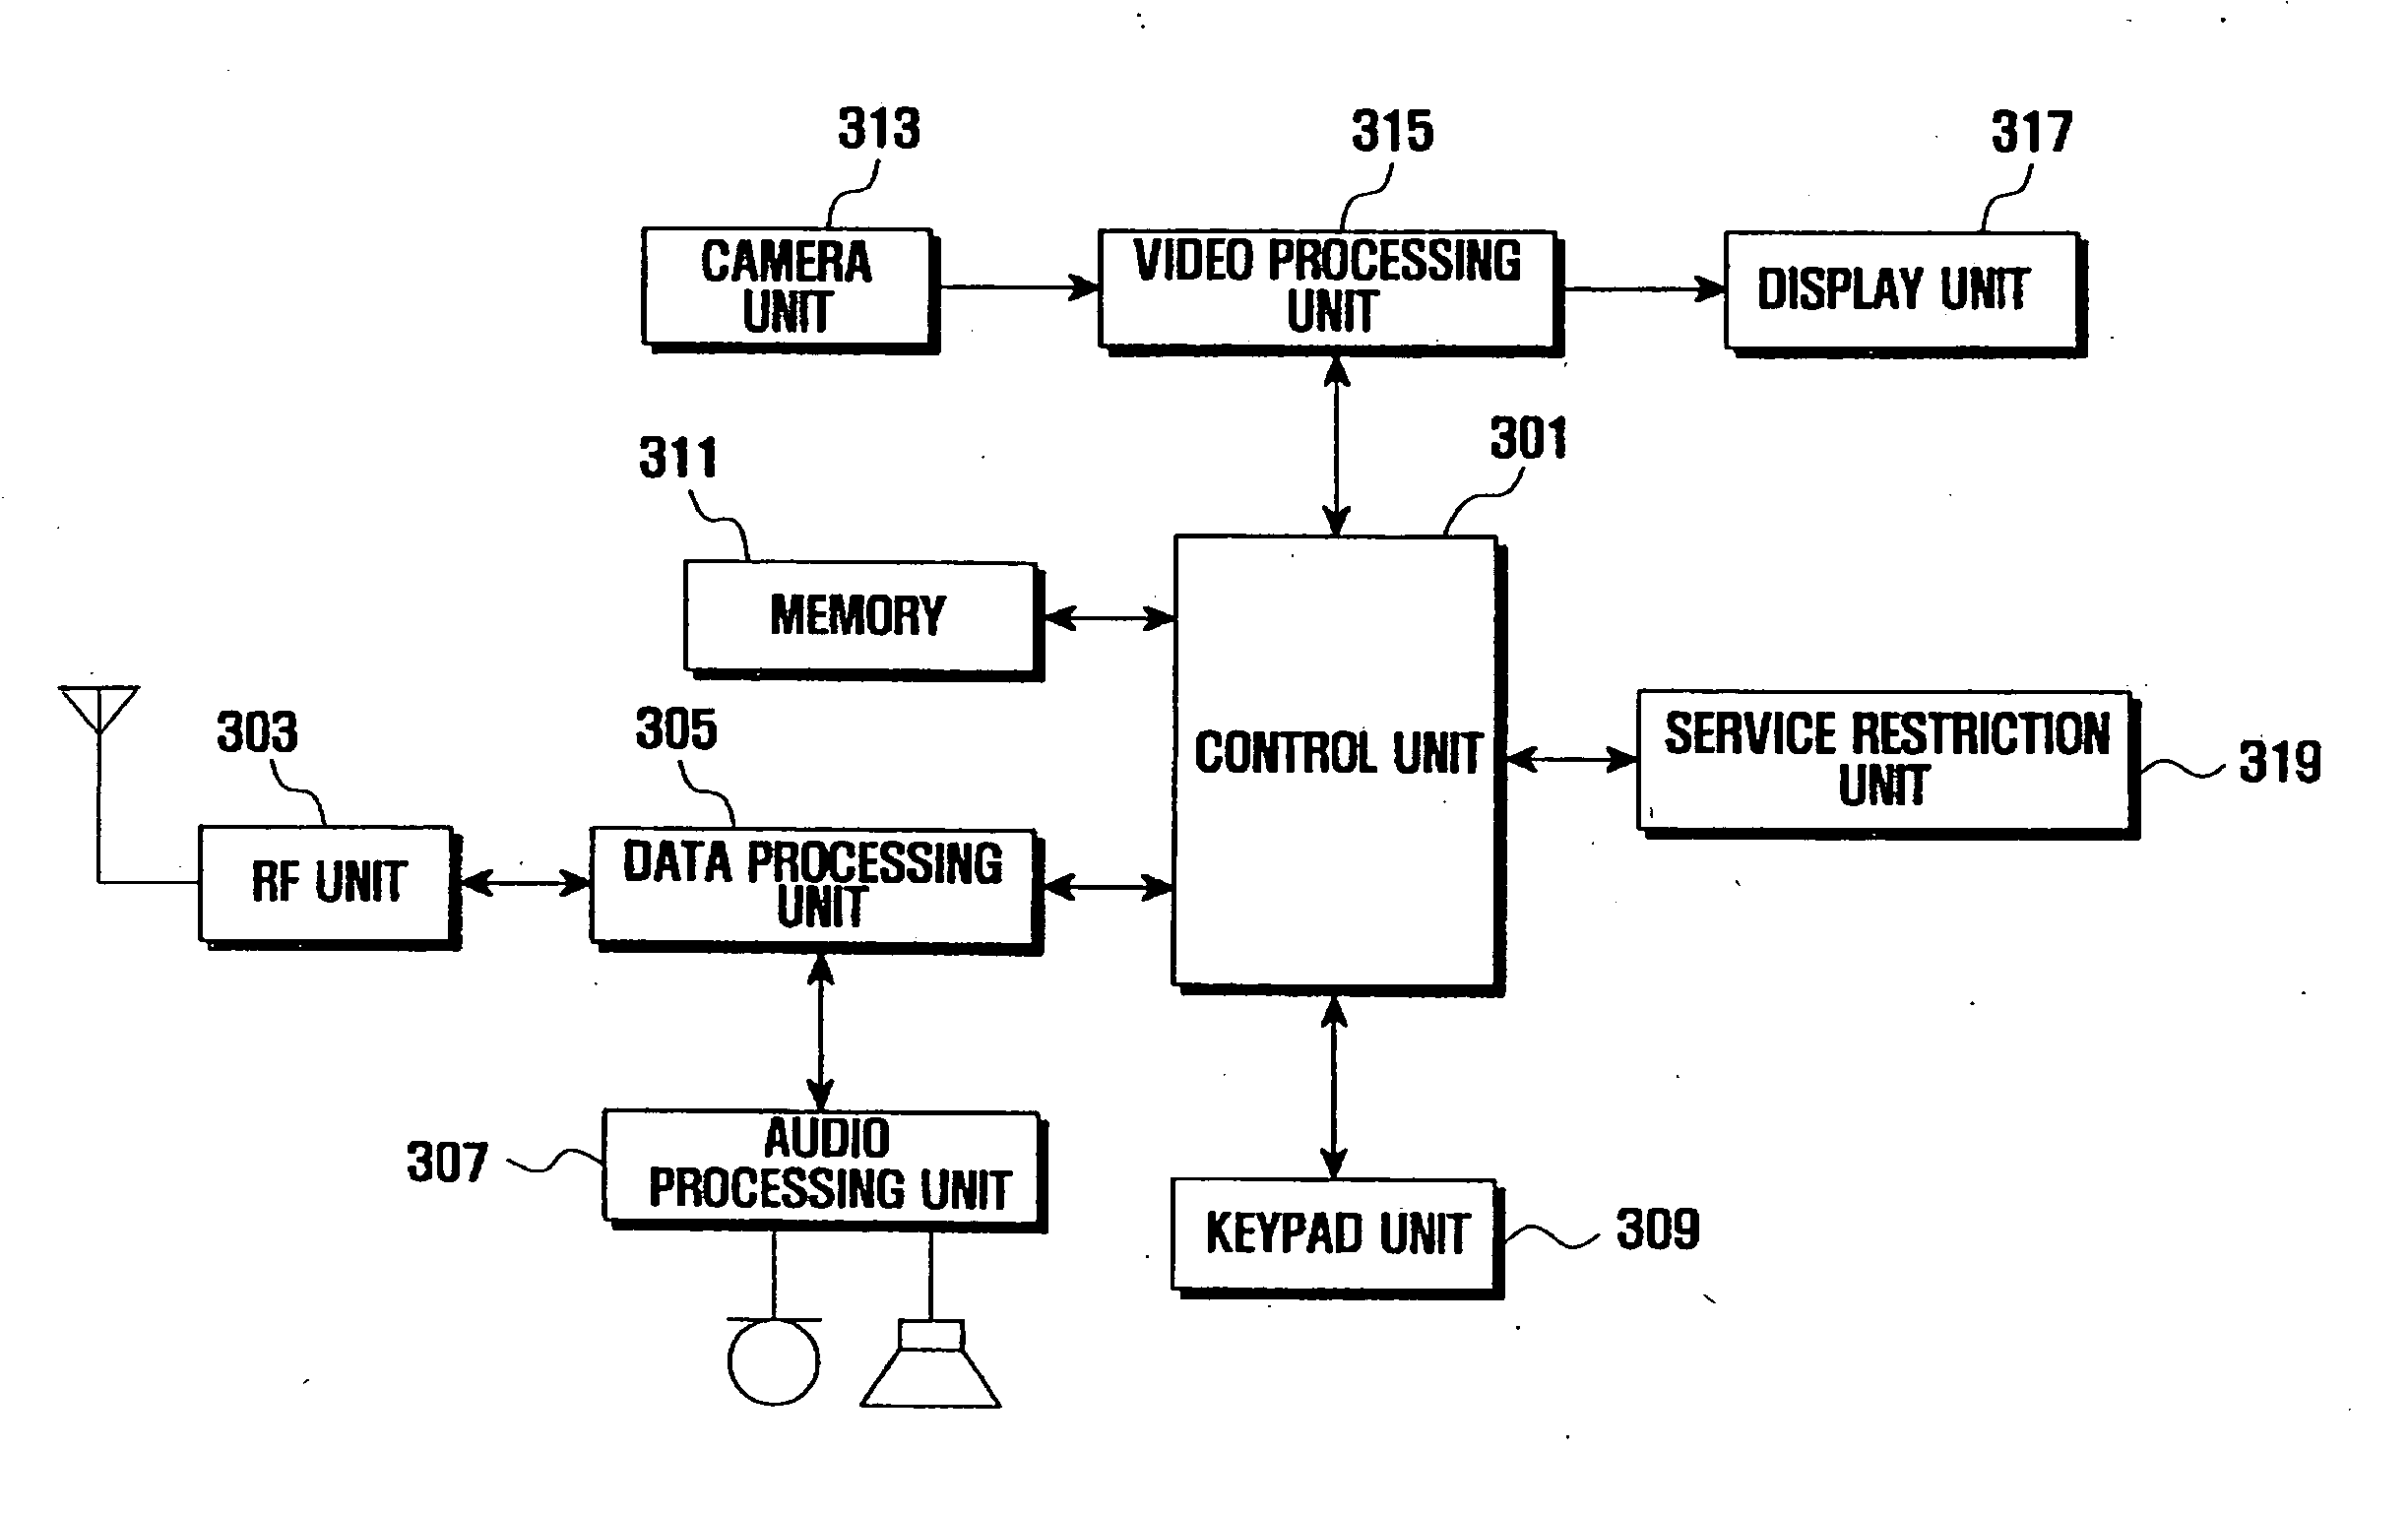 Service restriction apparatus and method for portable communication device